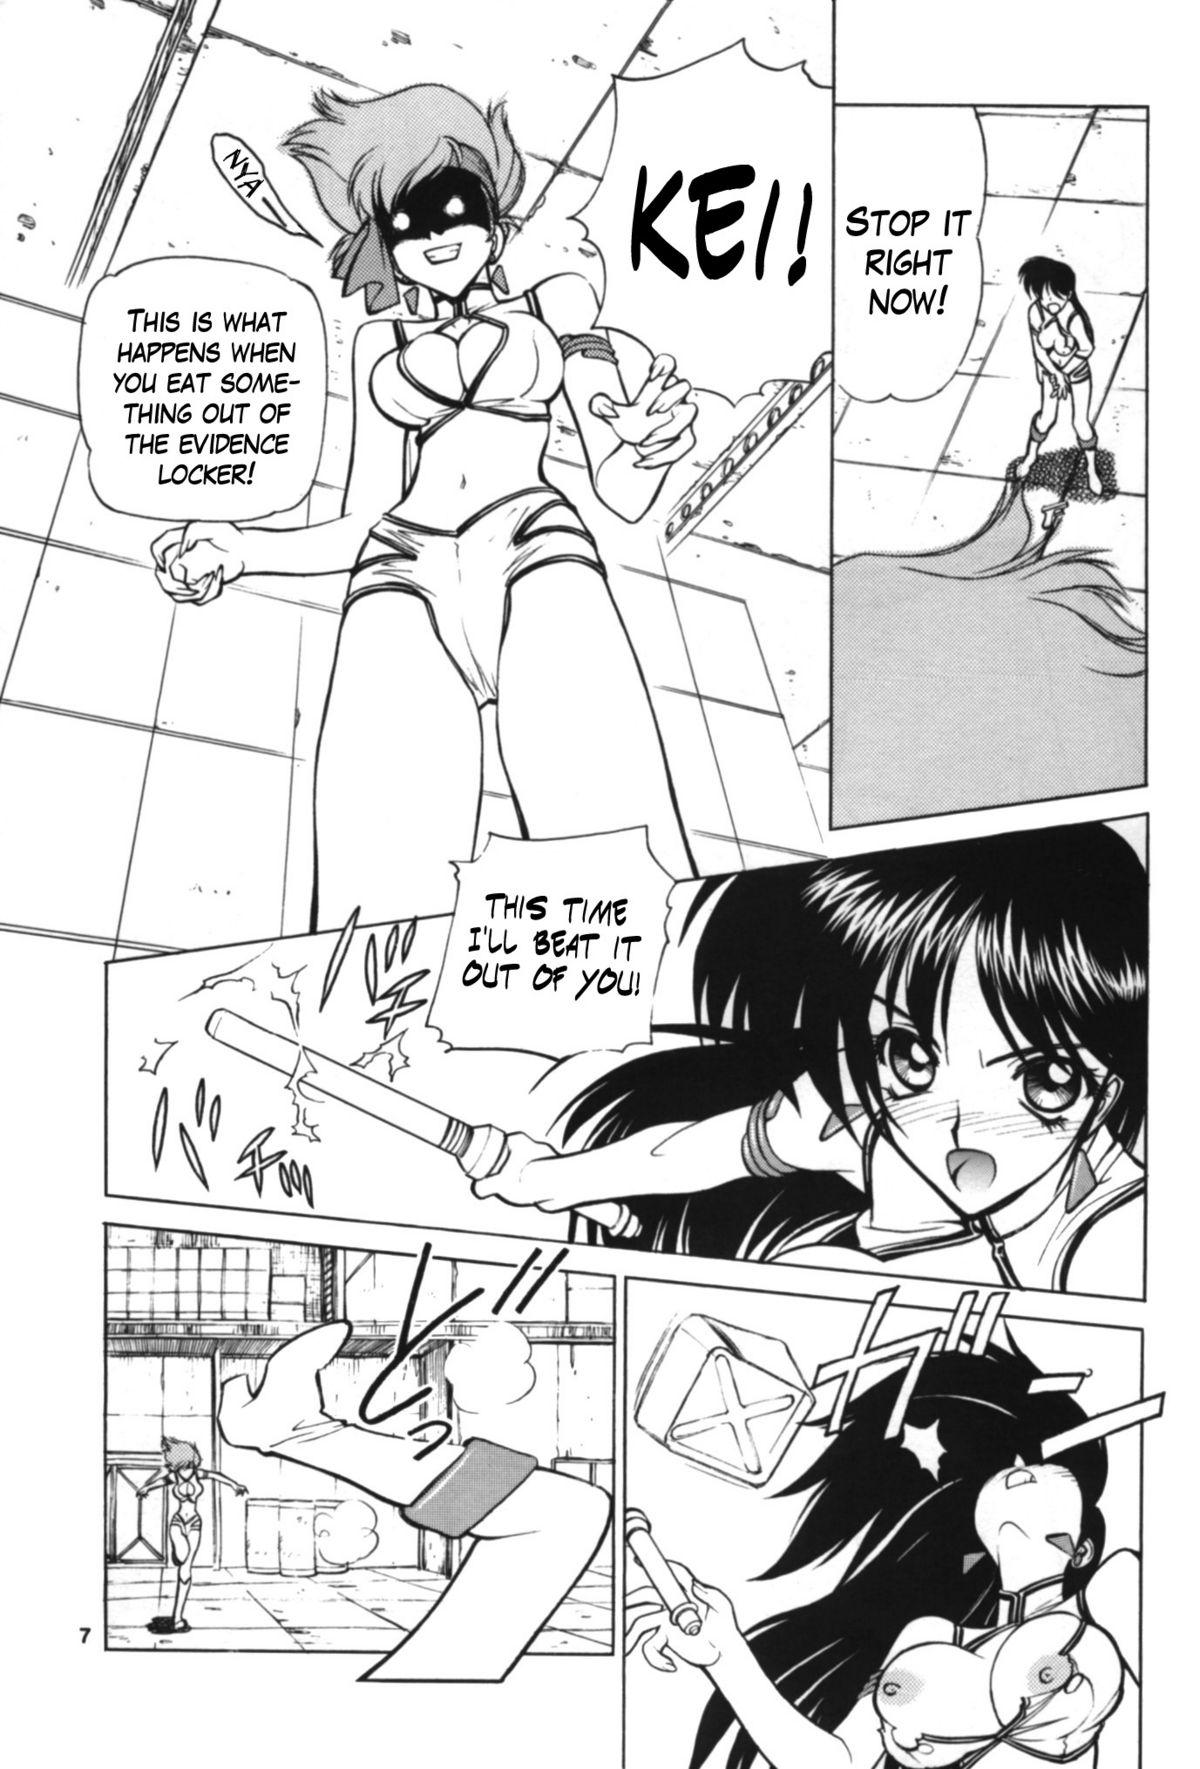 Free 18 Year Old Porn NNDP 3 - Dirty pair Spoon - Page 7